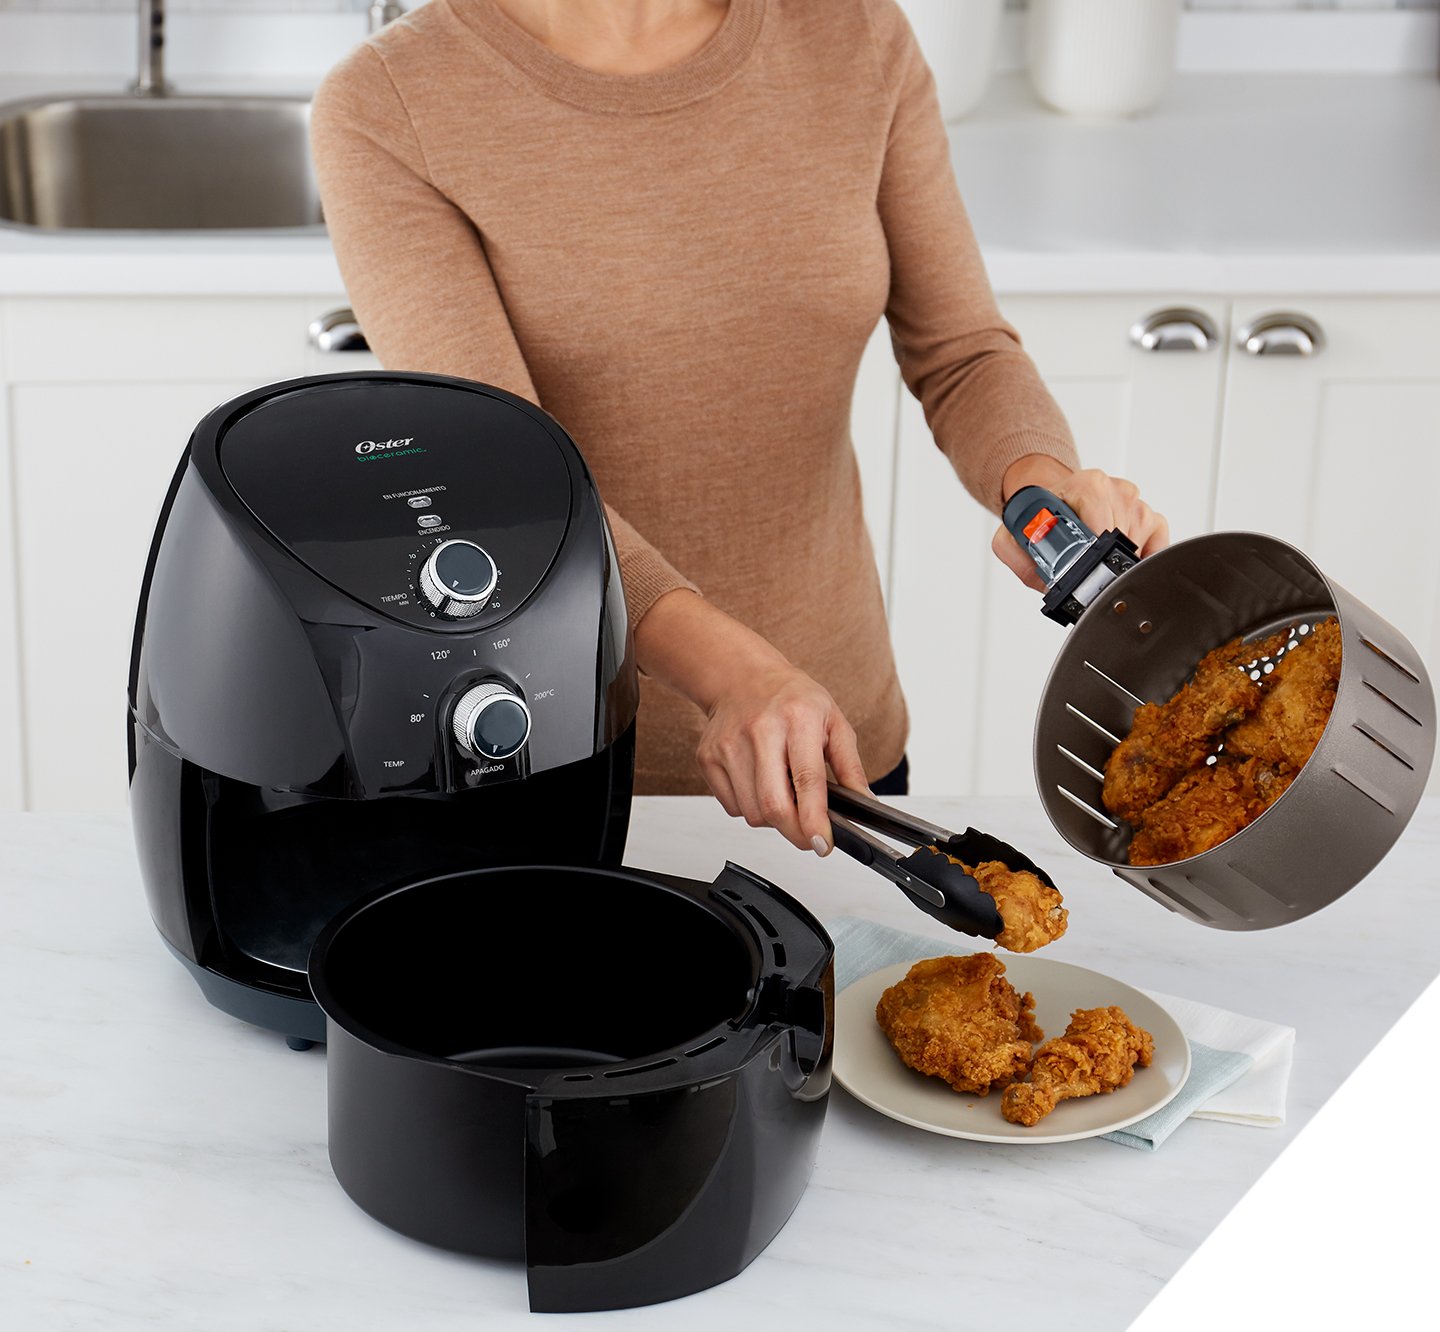 Oster Nonstick XL 5qt Digital Air Fryer with 8 Functions - Black